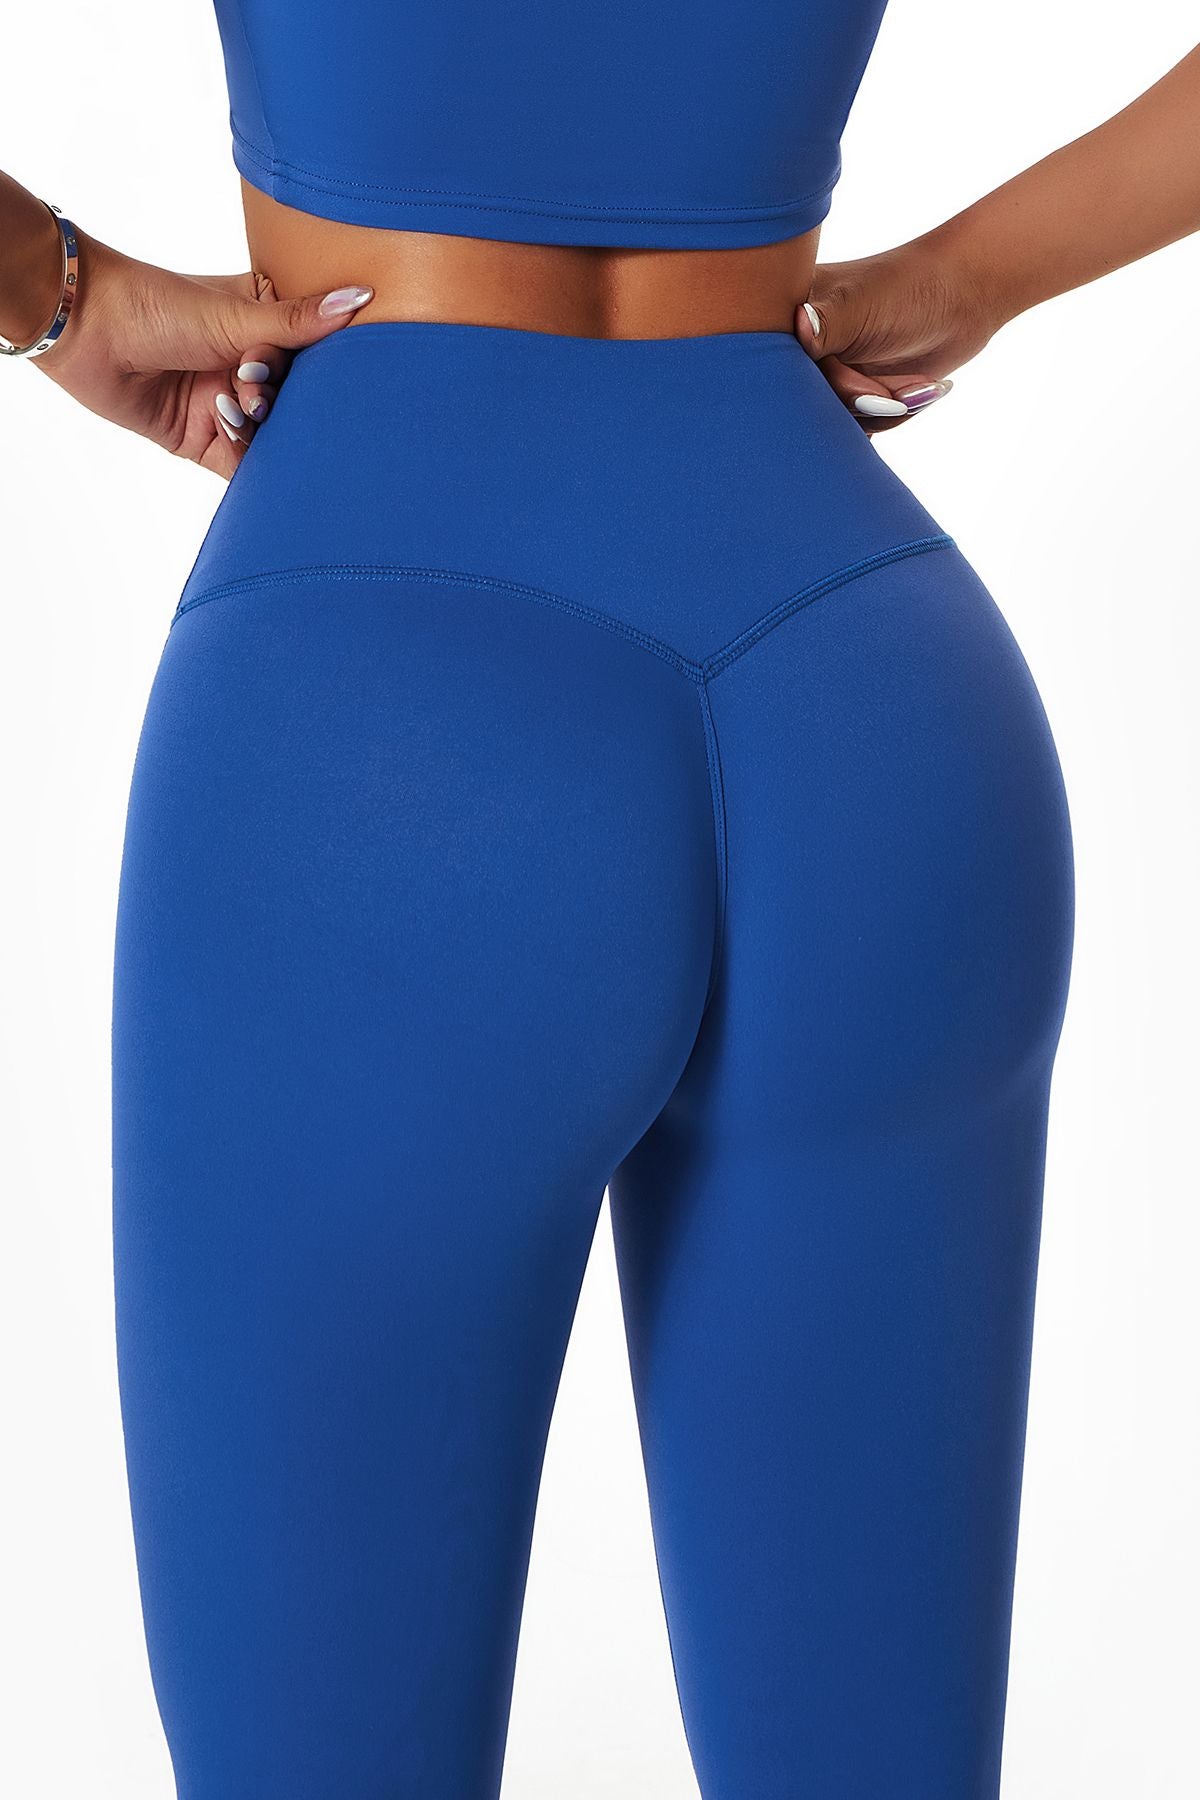 Fitnery Women's High Waist Textured Yoga Pants Ruched Butt Lifting